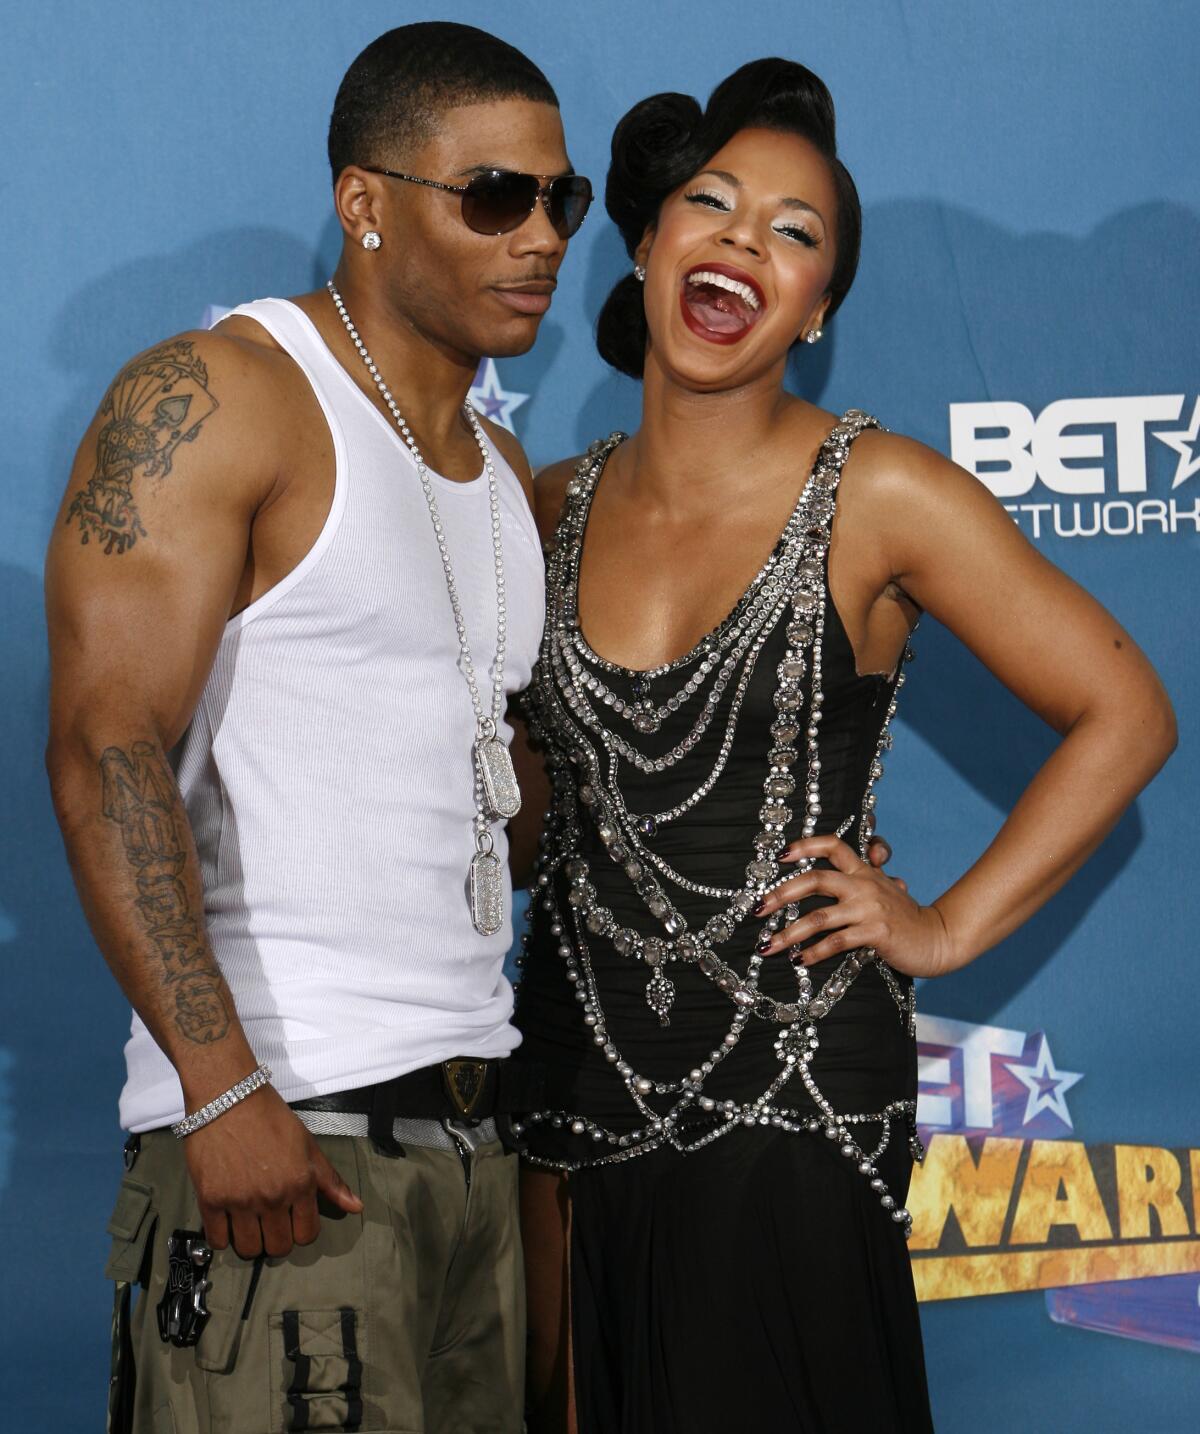 Nelly, left, wears a white A-shirt and olive green pants and Ashanti, right, wears a black dress wrapped in silver jewelry 